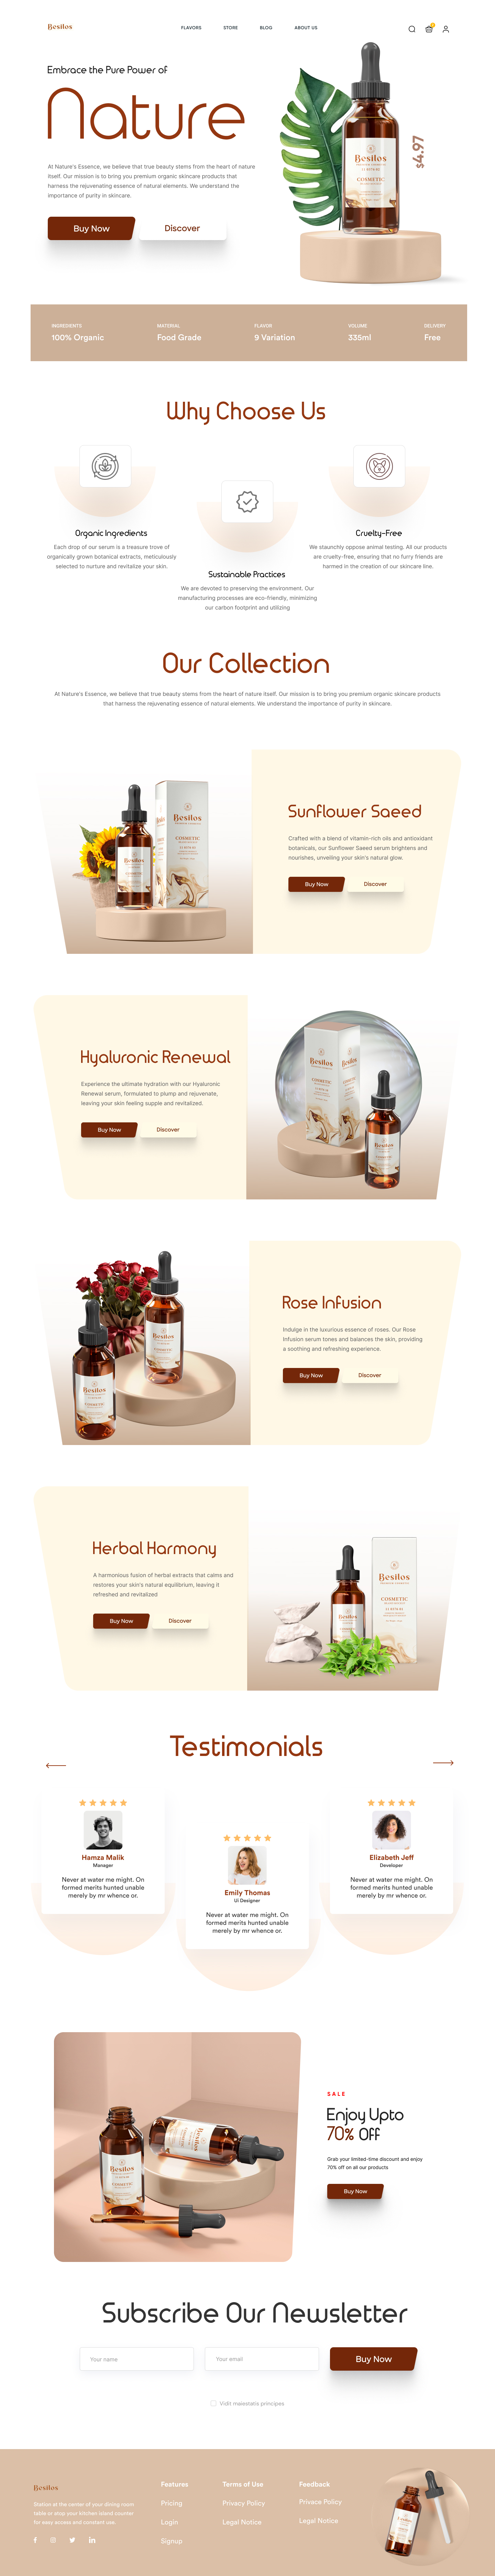 Full Preview of Besilos - Cosmetics Store Shopify Website Design